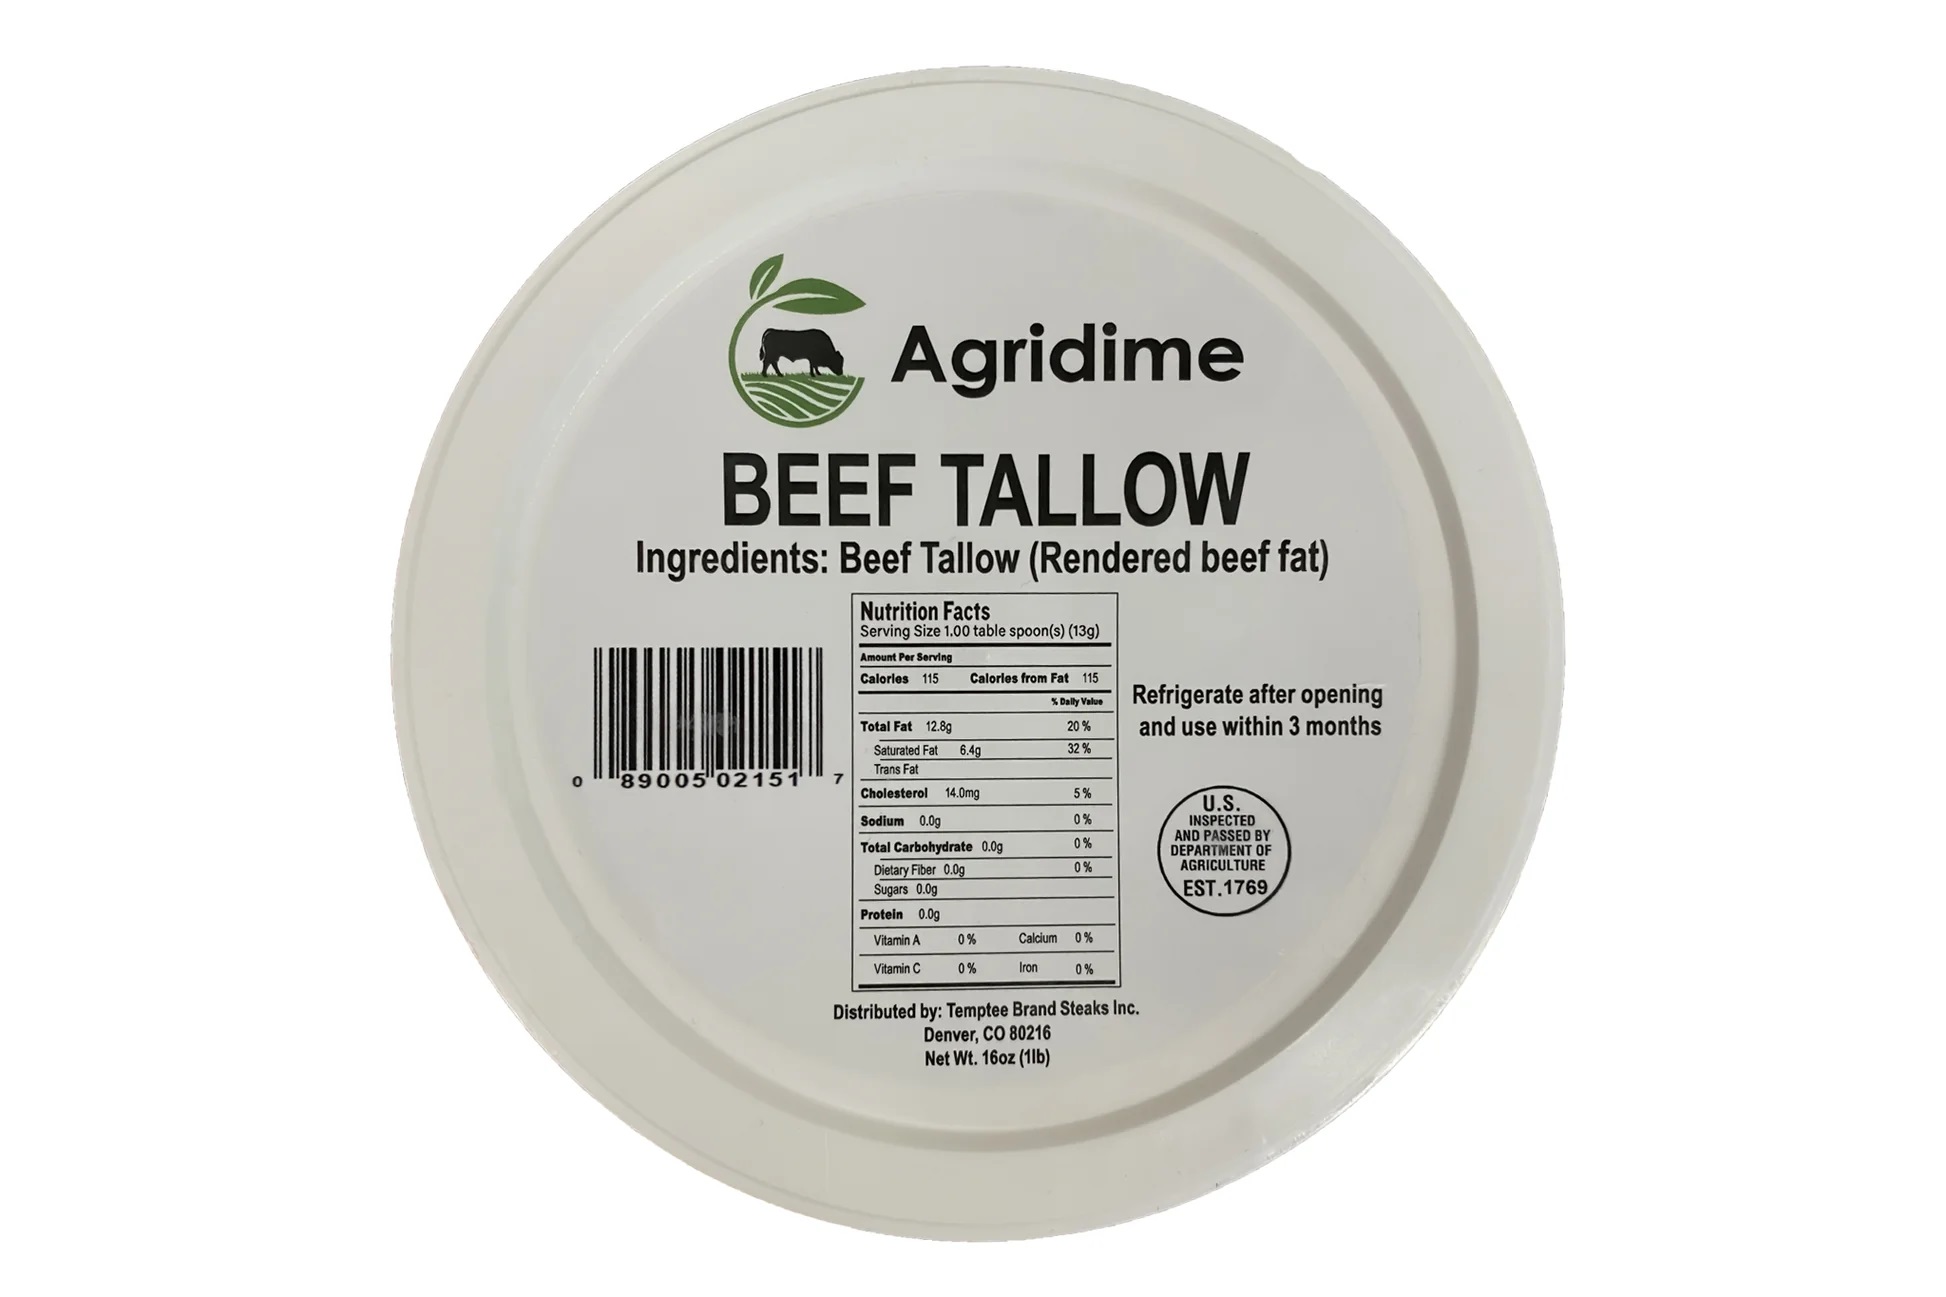 10-facts-about-beef-tallow